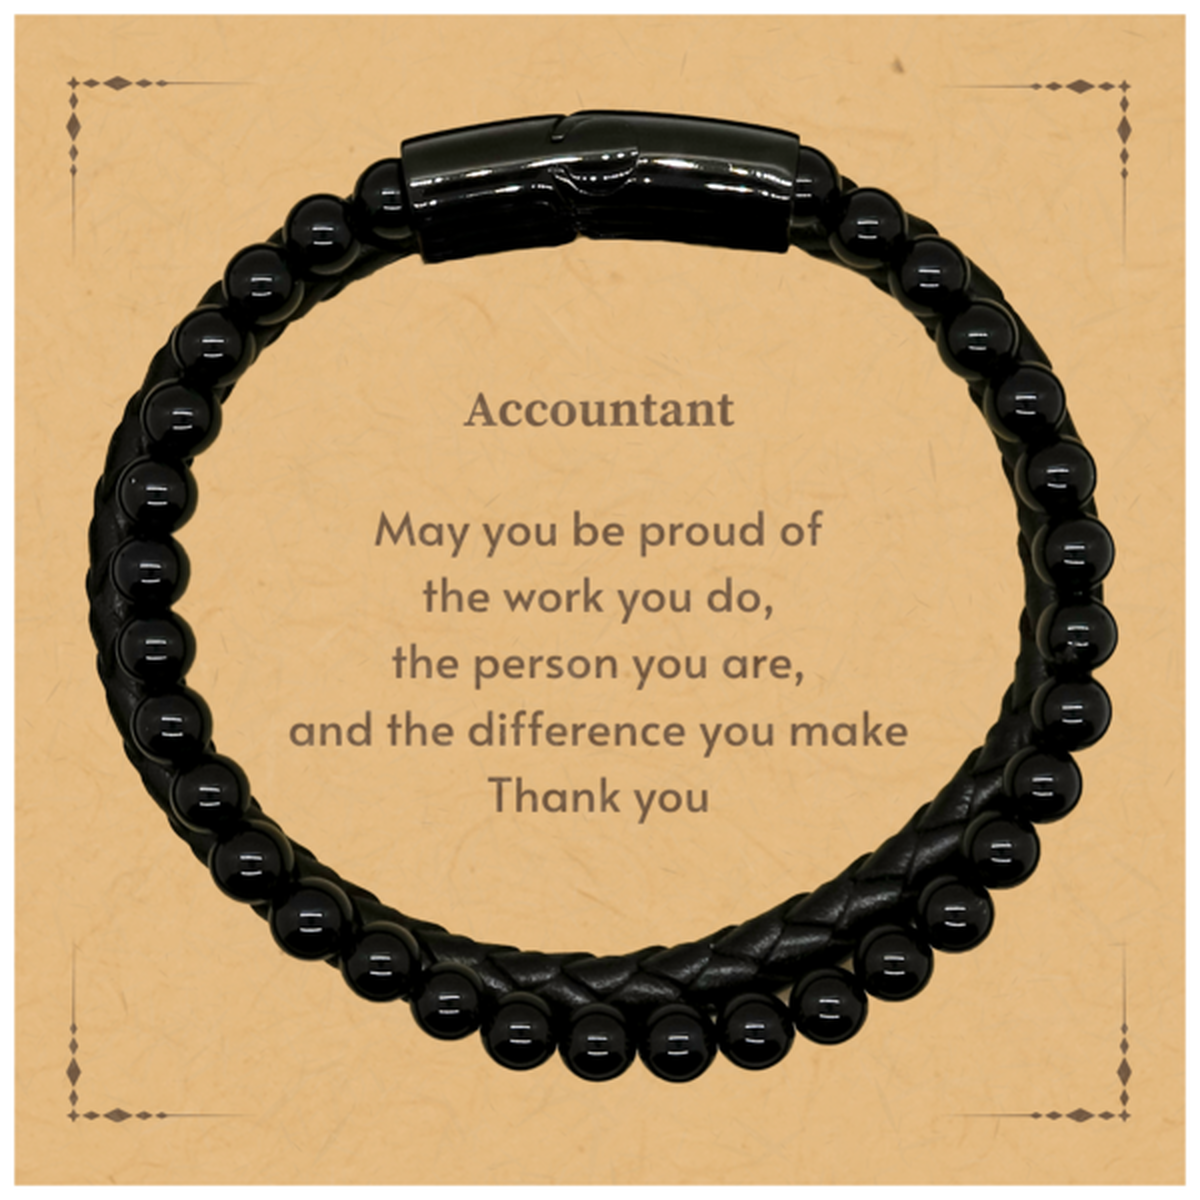 Heartwarming Stone Leather Bracelets Retirement Coworkers Gifts for Accountant, Accountant May You be proud of the work you do, the person you are Gifts for Boss Men Women Friends